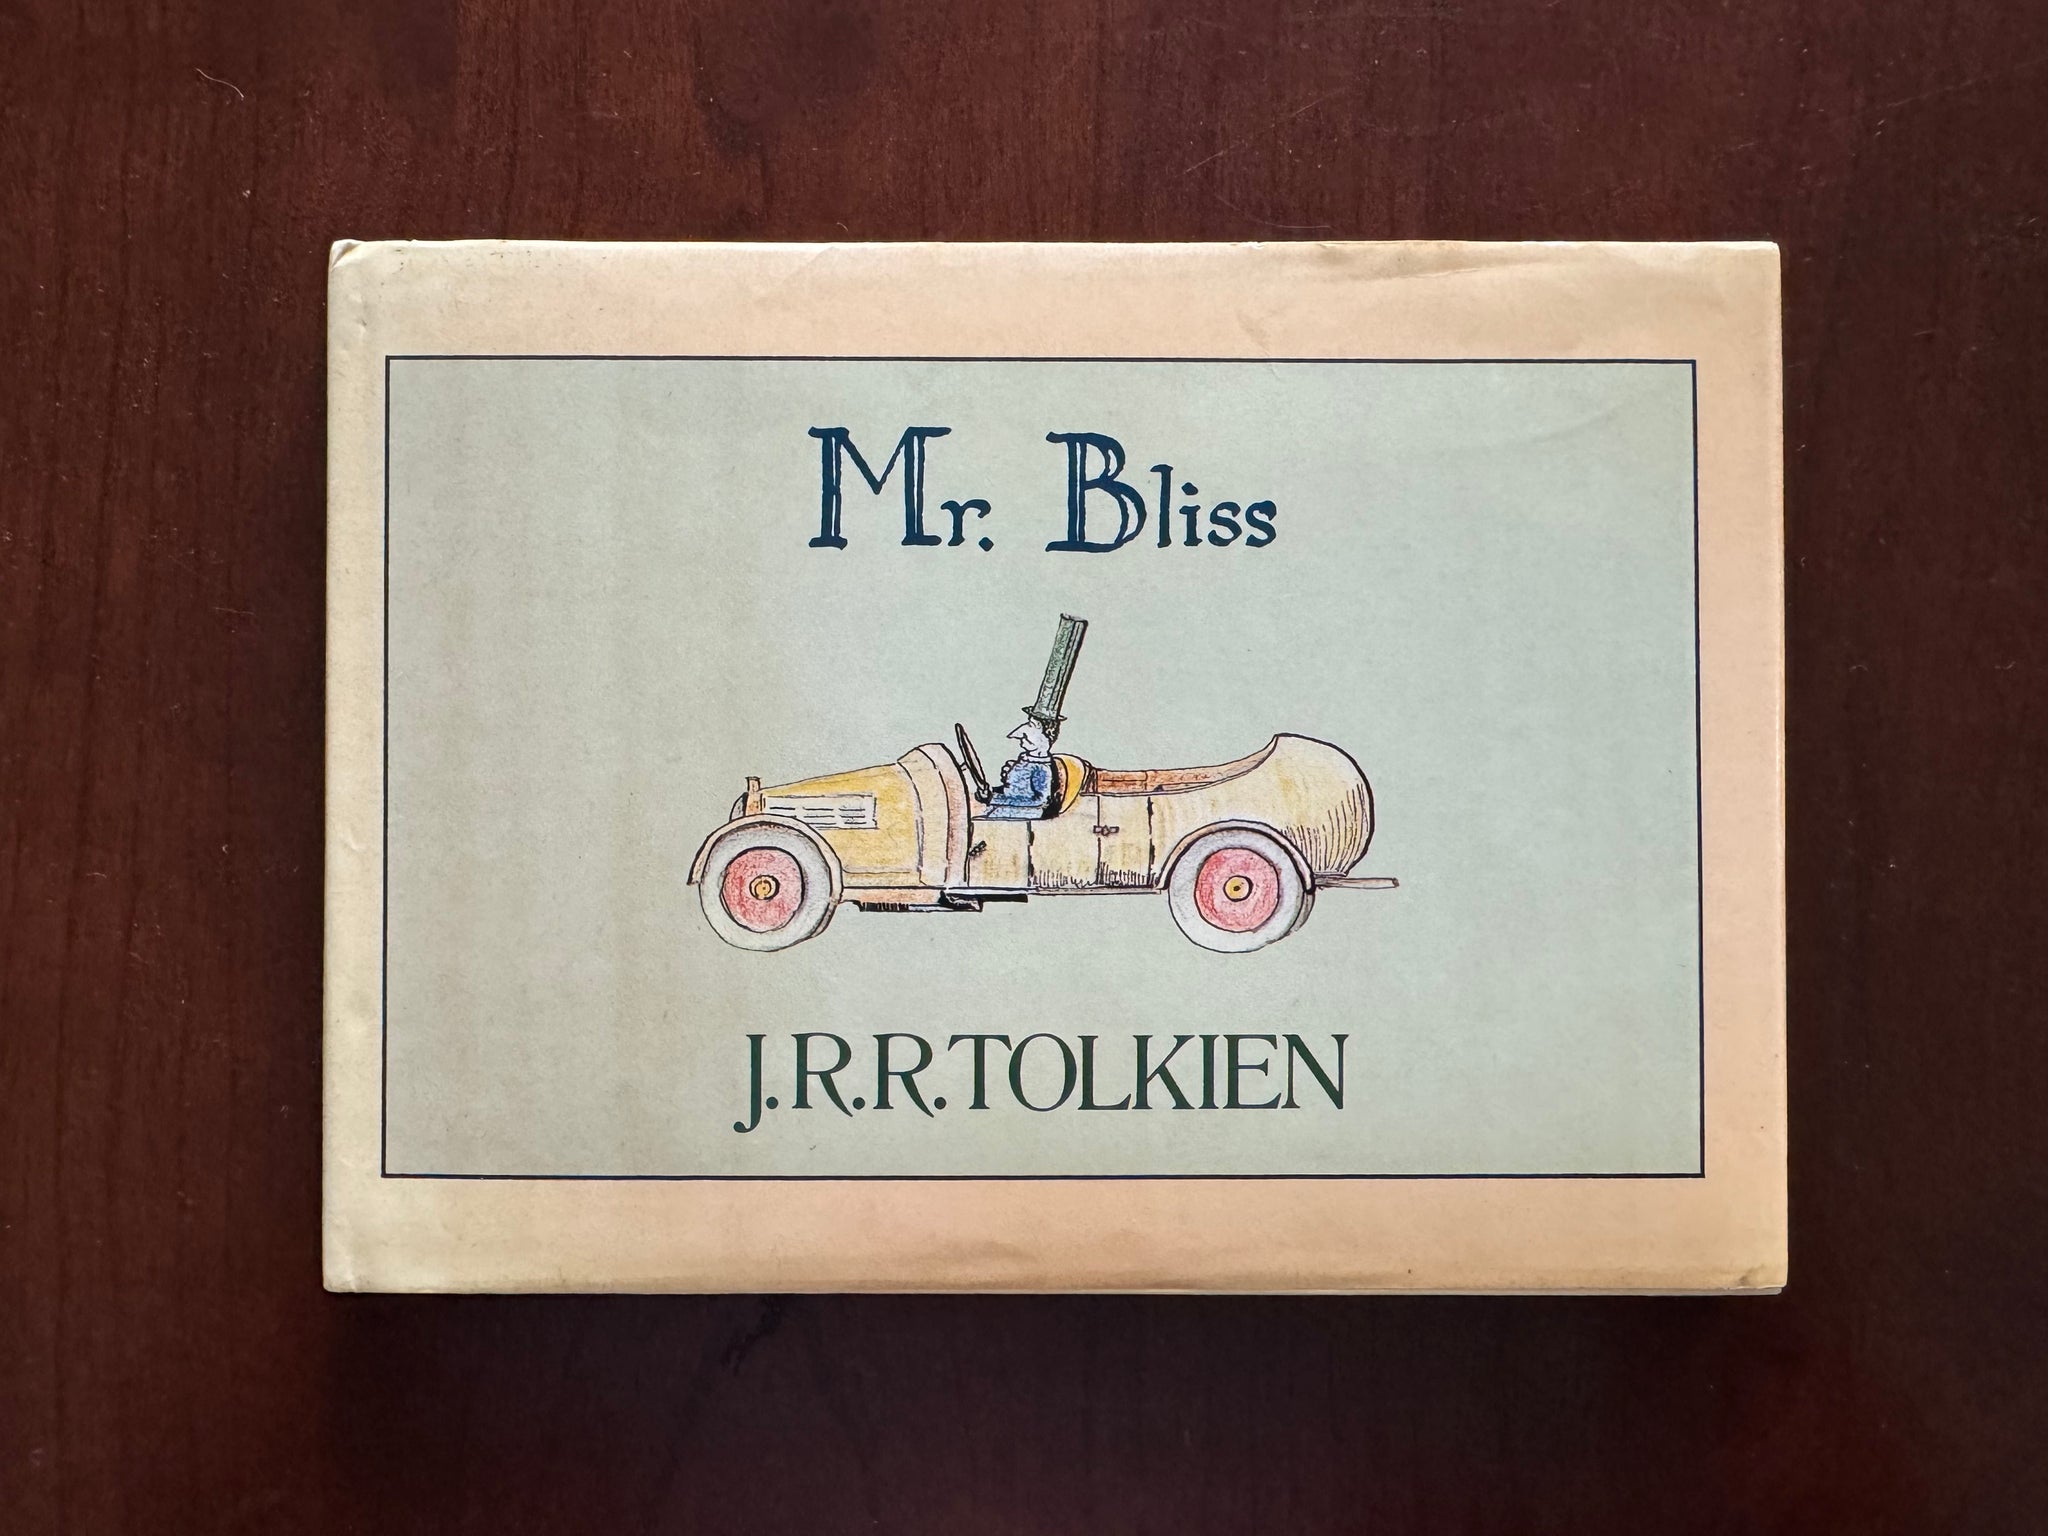 Mr. Bliss (1982 First Edition) - J.R.R. Tolkien